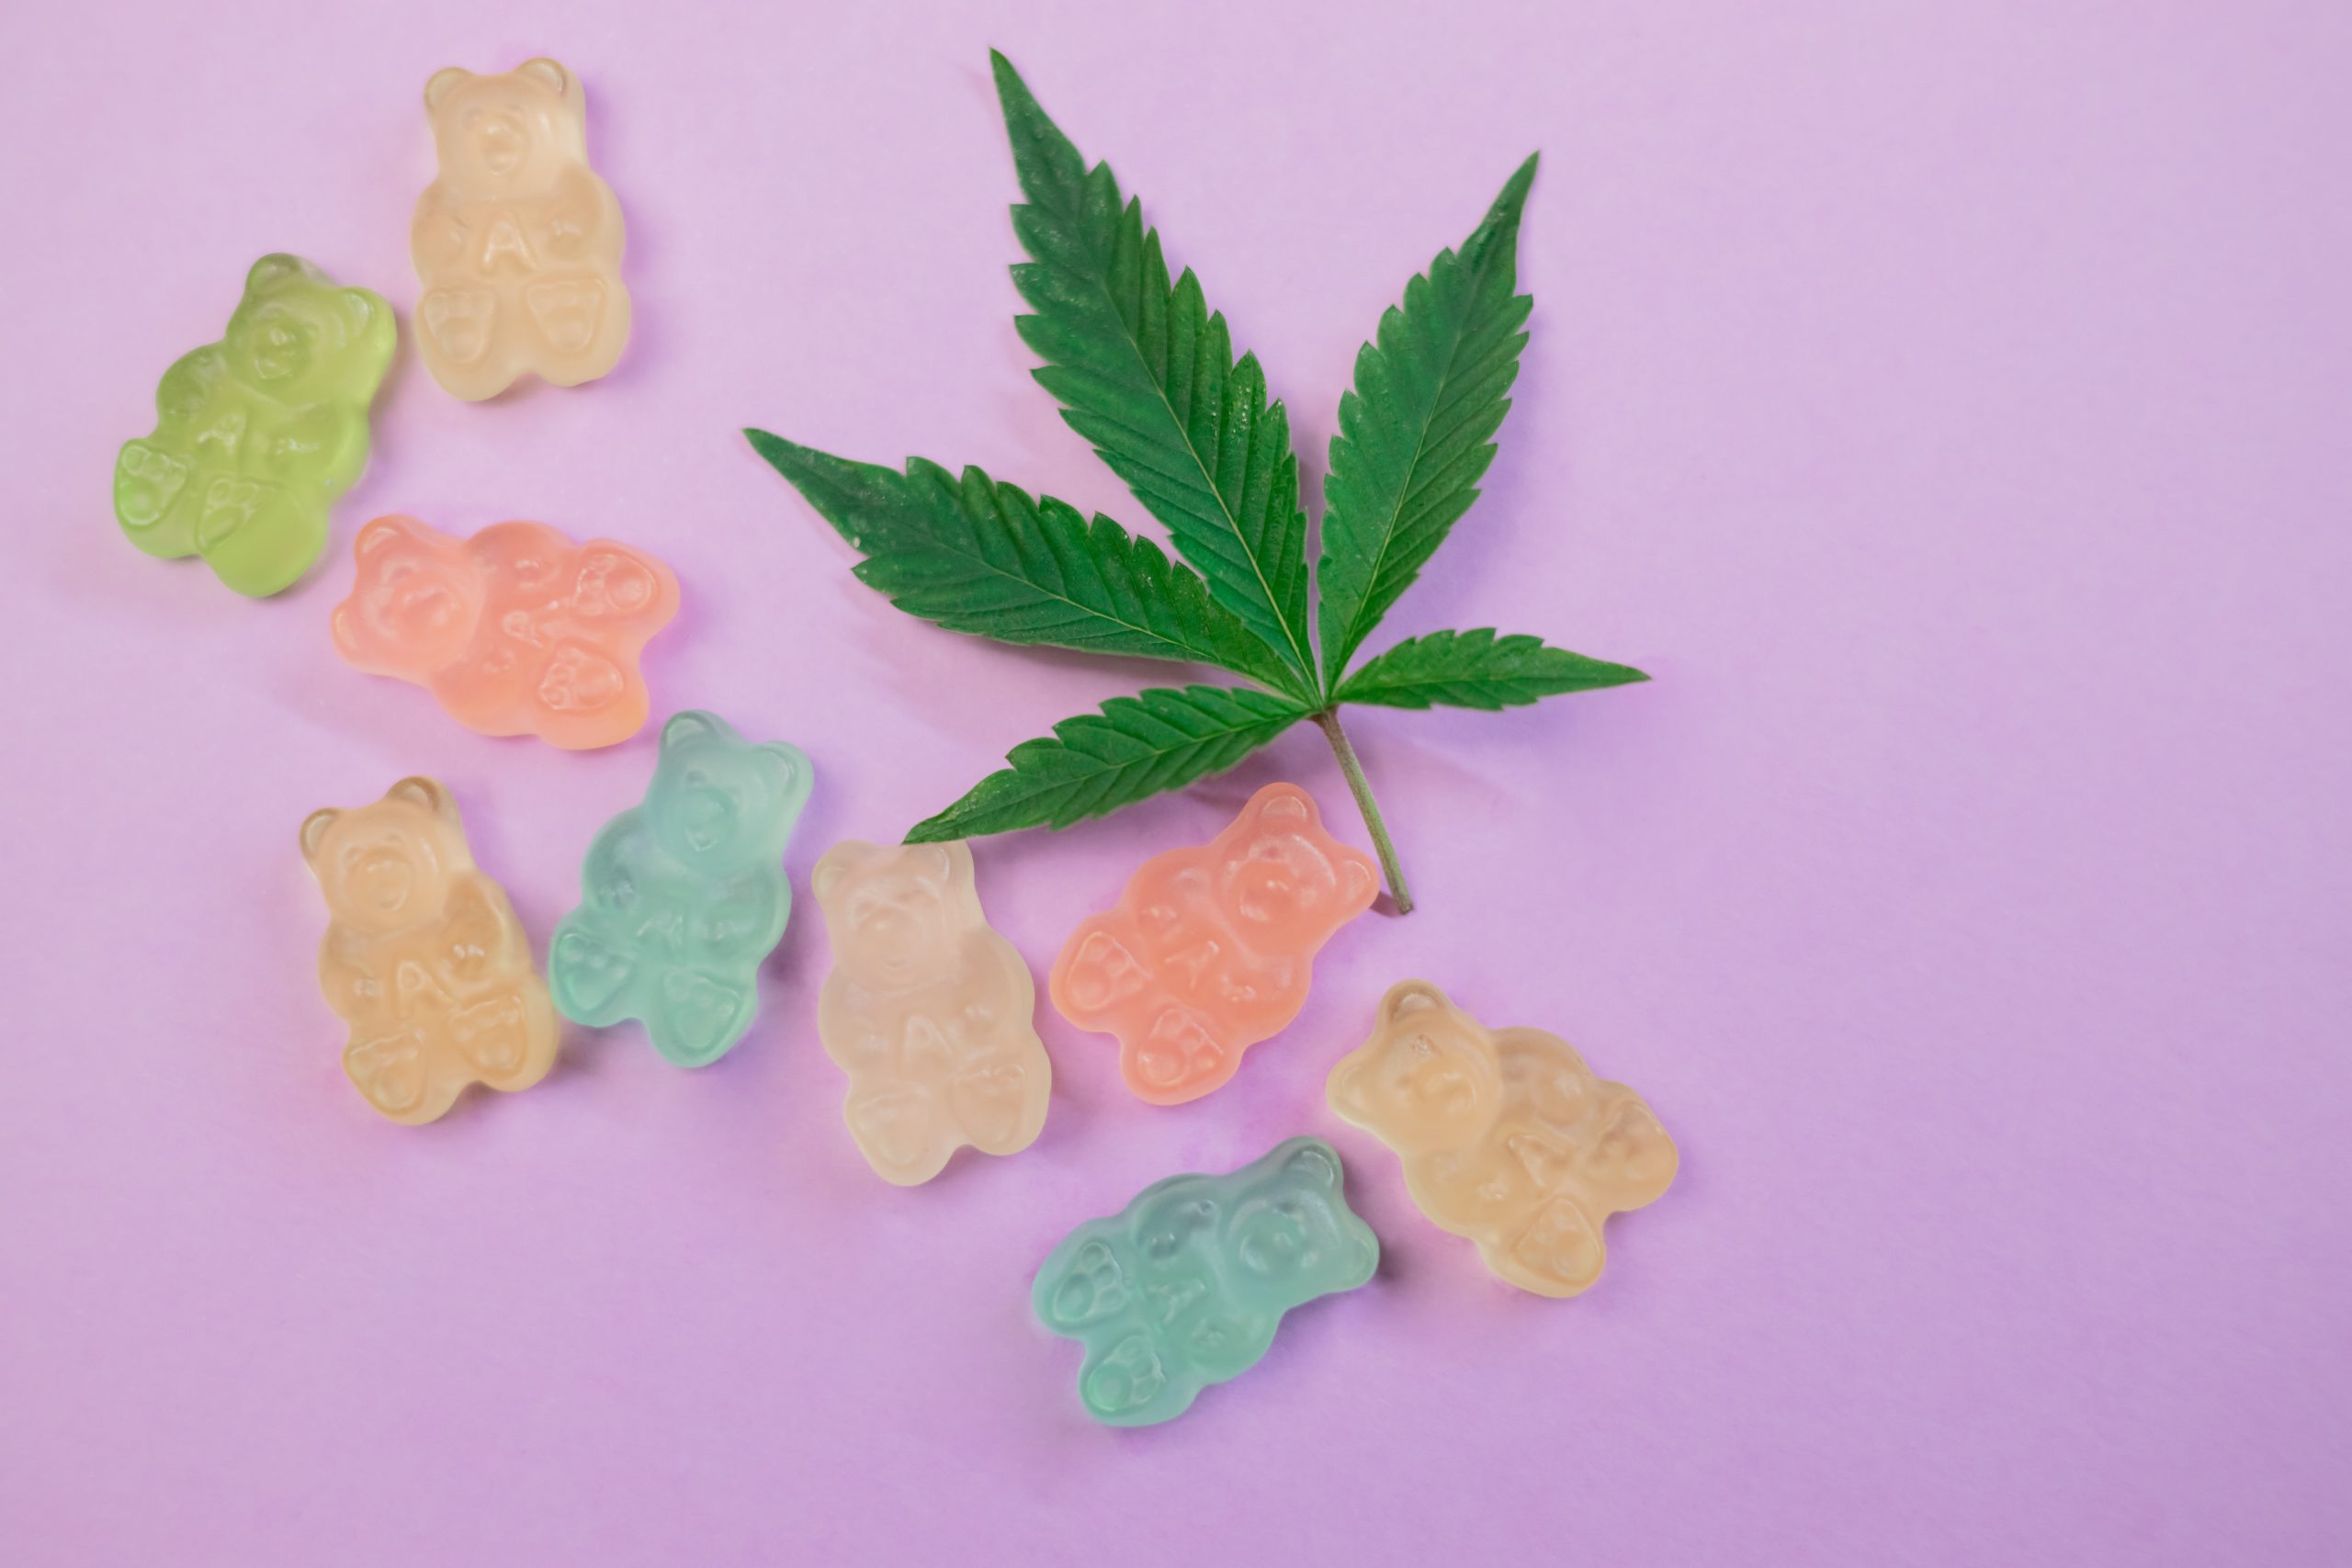 Upstate Ny Poison Center Sees 9x Increase In Kids Under 5 Sickened By Weed Edibles